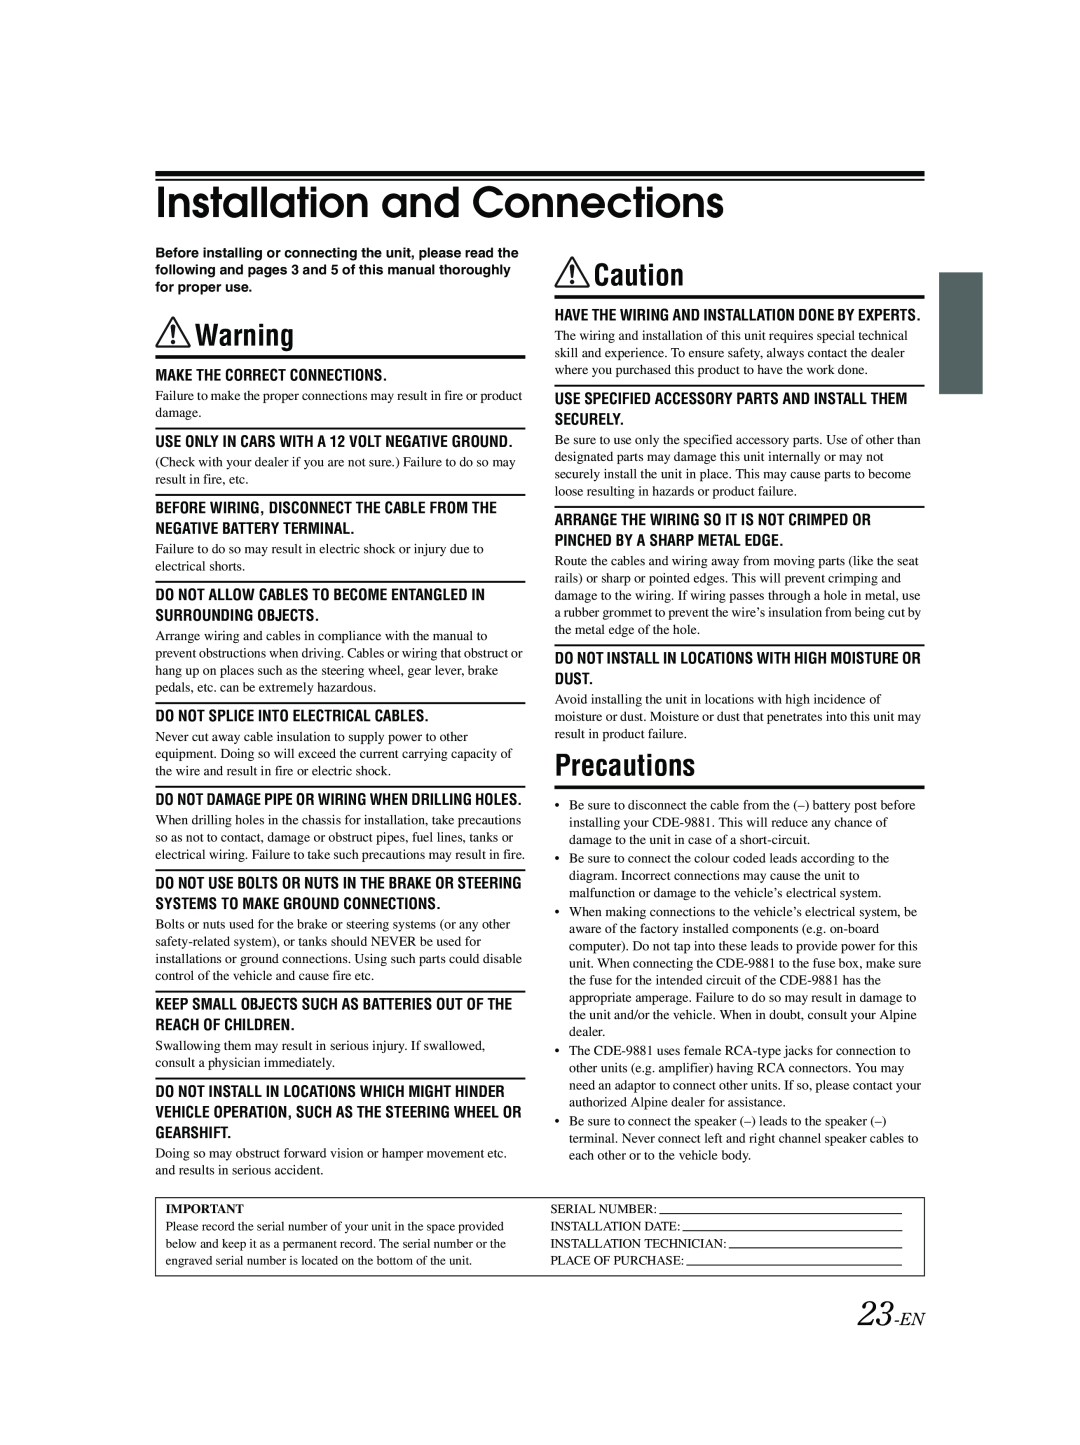 Alpine CDE-9881 owner manual Installation and Connections, Precautions, 23-EN 